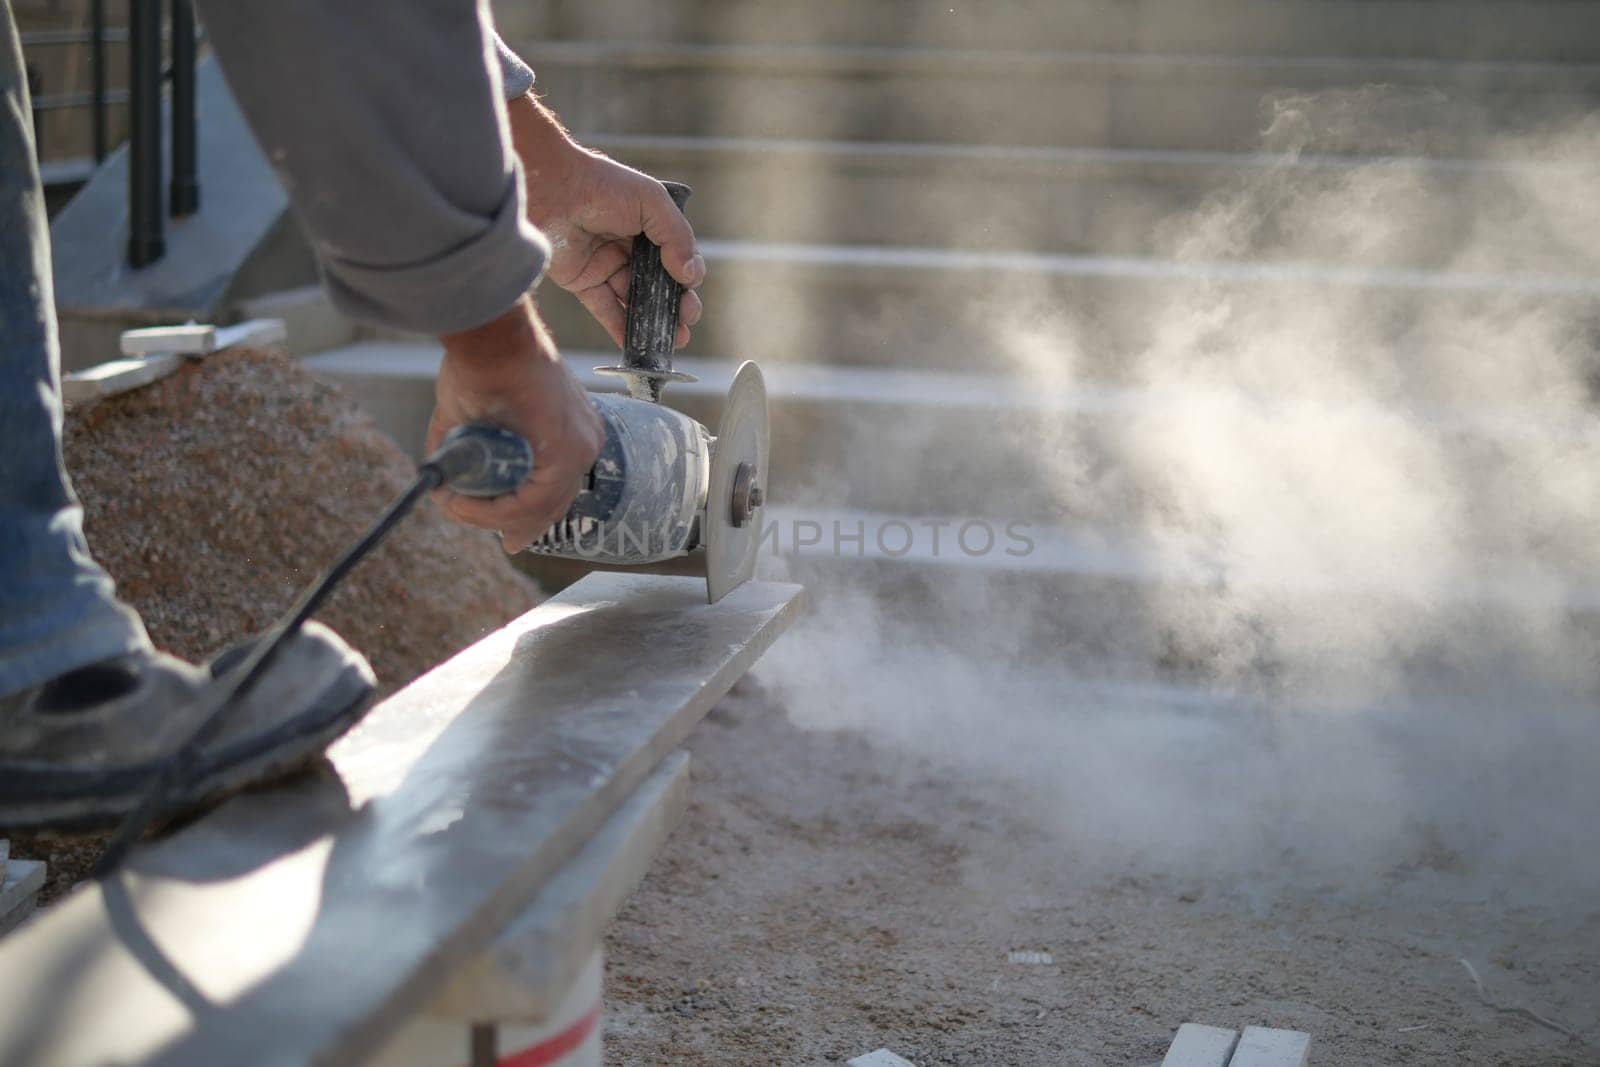 A man is using a grinder to cut a piece of concrete by towfiq007